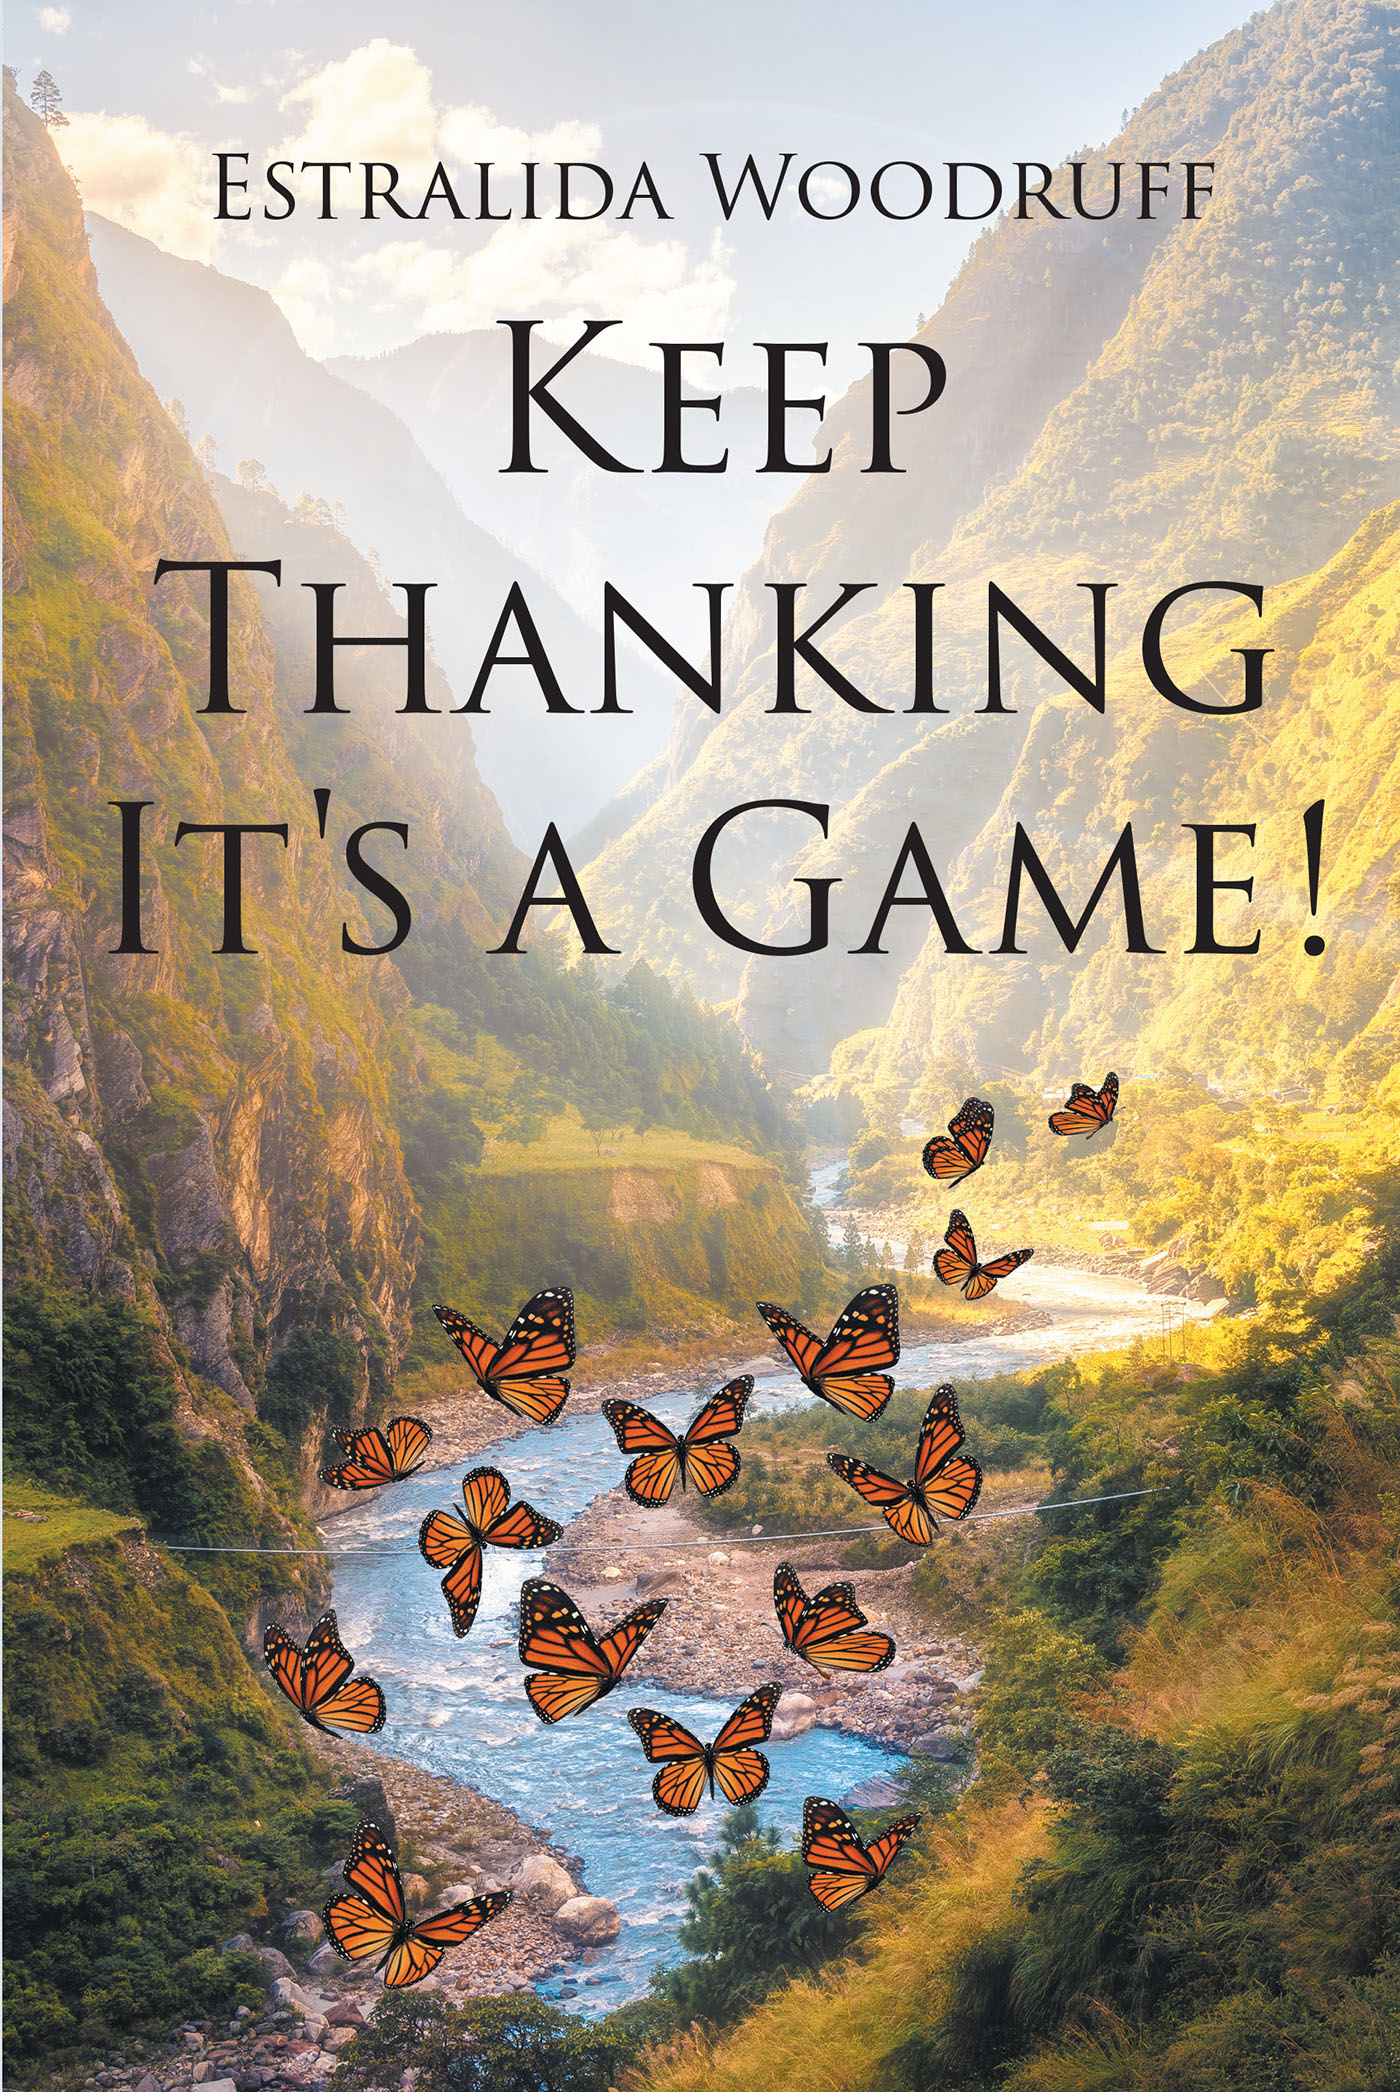 Author Estralida Woodruff’s New Book, "Keep Thanking It’s a Game!" is a Message to Help Lost Souls Become Children of God